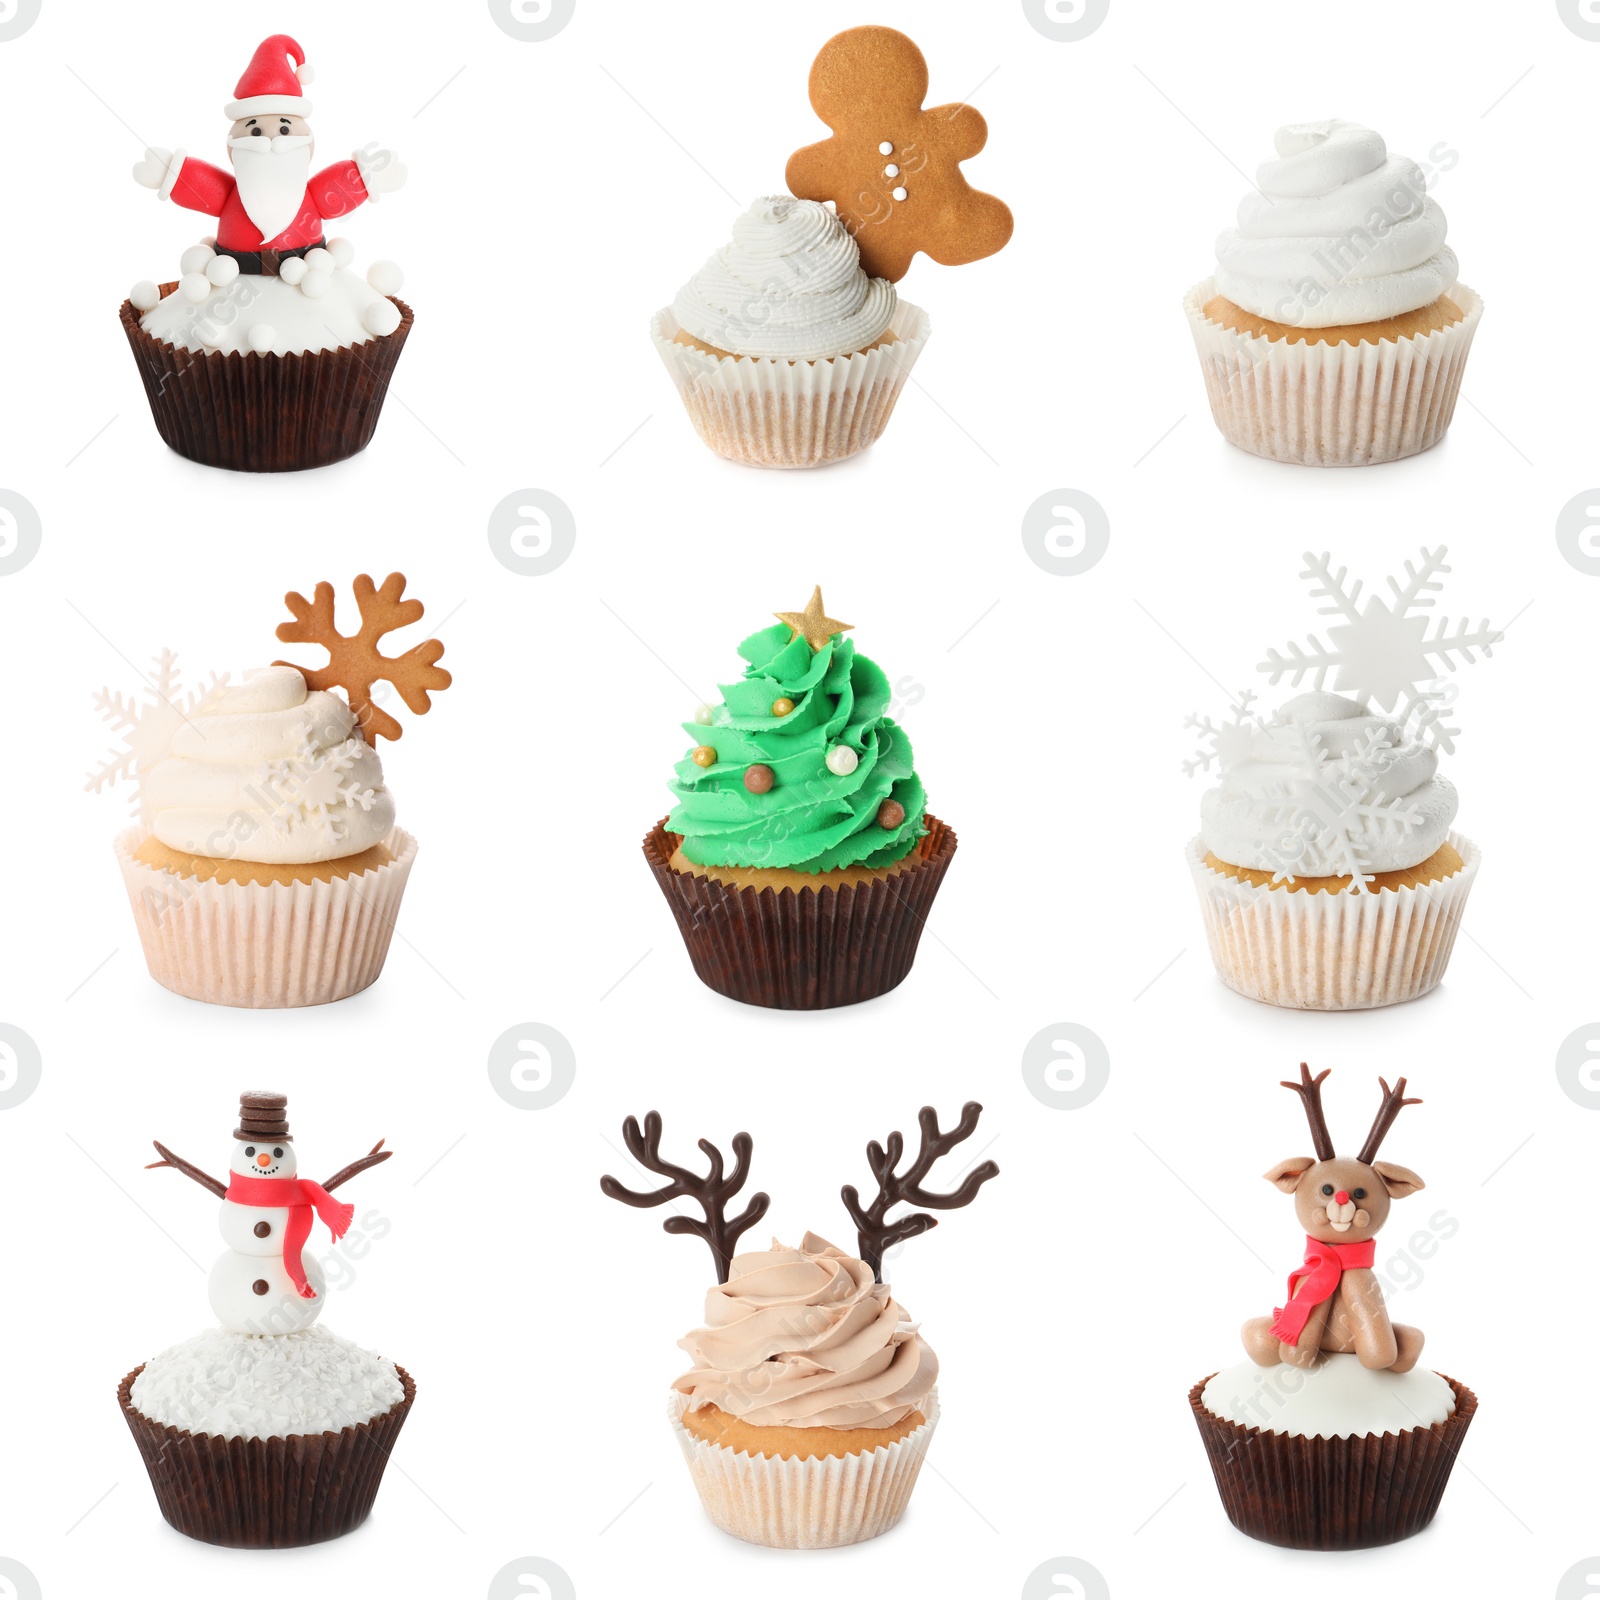 Image of Tasty cupcakes with Christmas decor on white background, collage